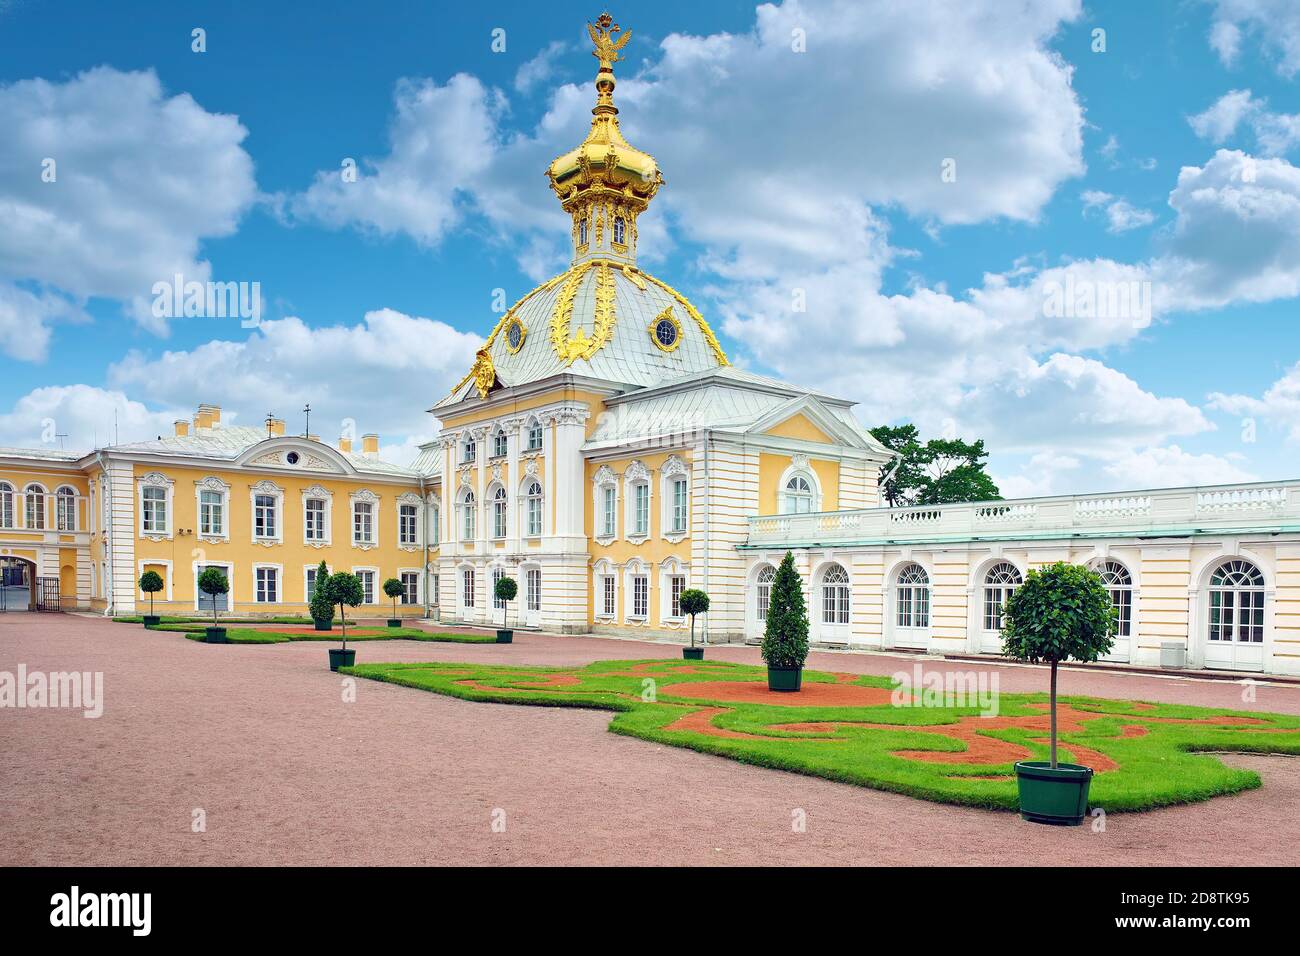 St. Petersburg is a Russian port city on the Baltic Sea. It was the imperial capital for 2 centuries, having been founded in 1703. Stock Photo